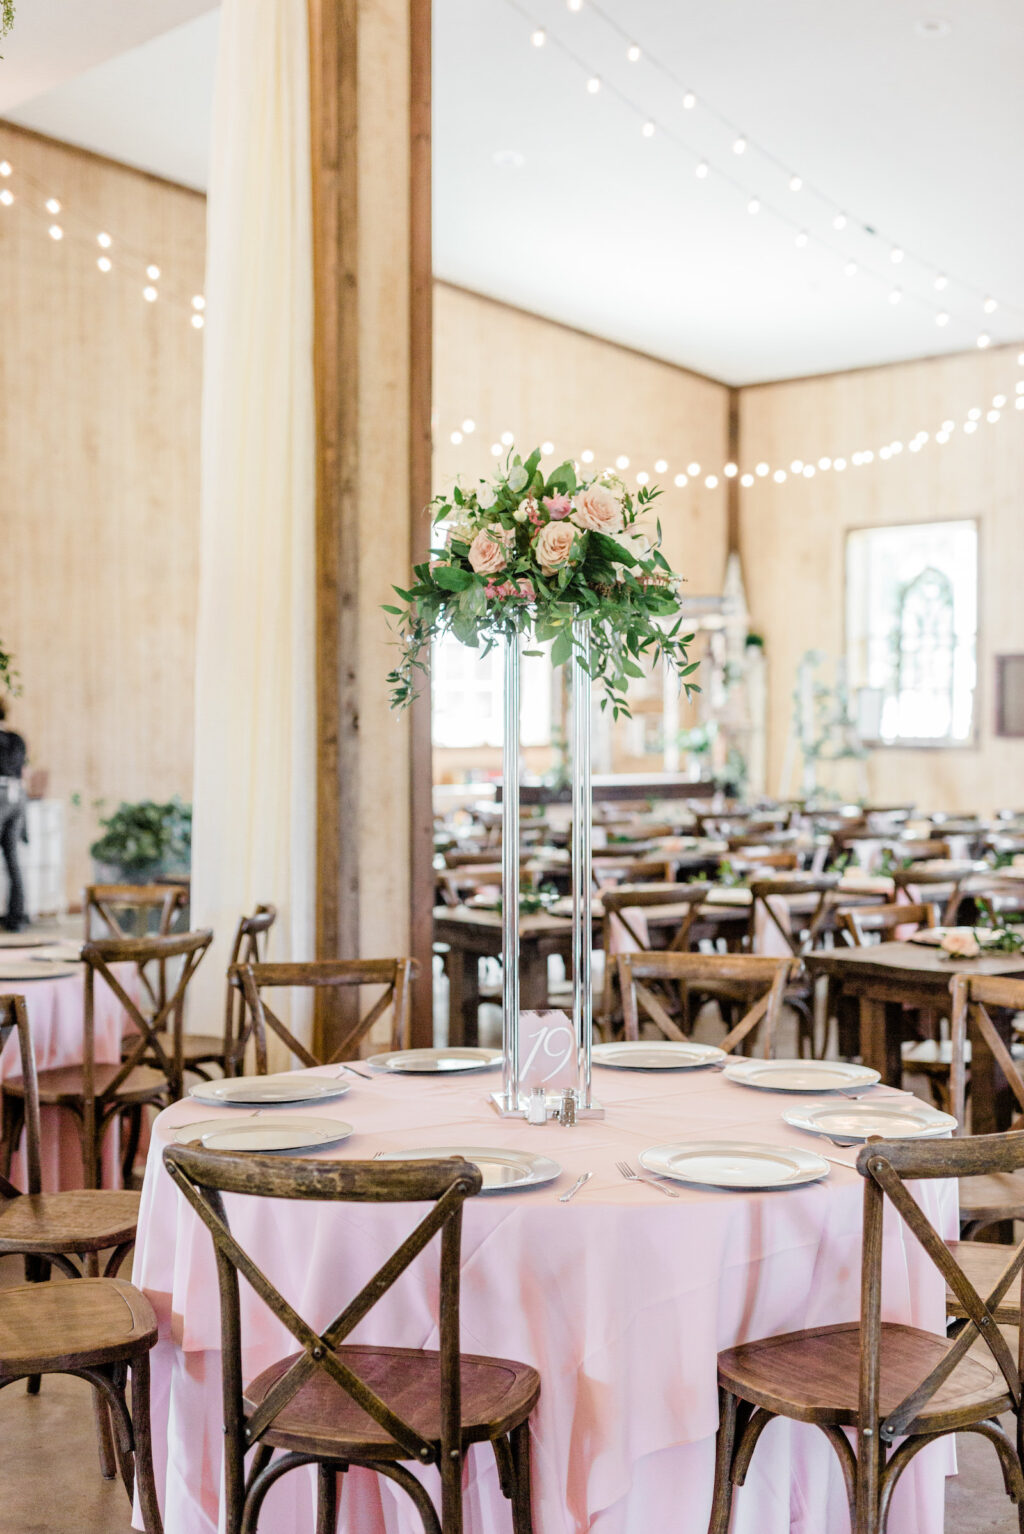 Rustic Wooden Chairs and Pale Pink Linens with Tall Floral Centerpieces on Wedding Reception Tablescapes | Tampa Wedding Venue Covington Farms